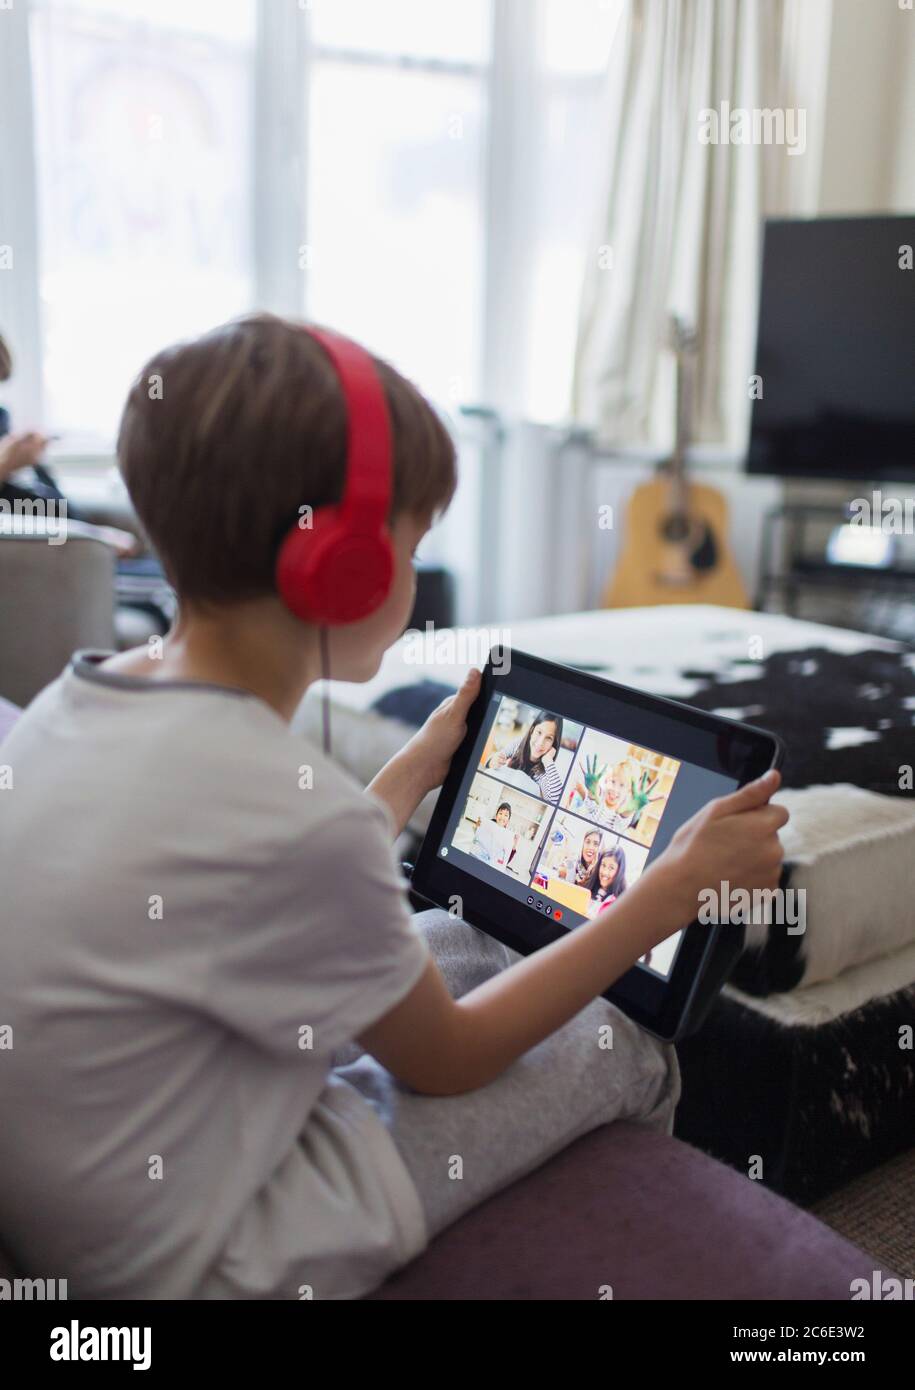 Boy with headphones and digital tablet homeschooling on sofa Stock Photo